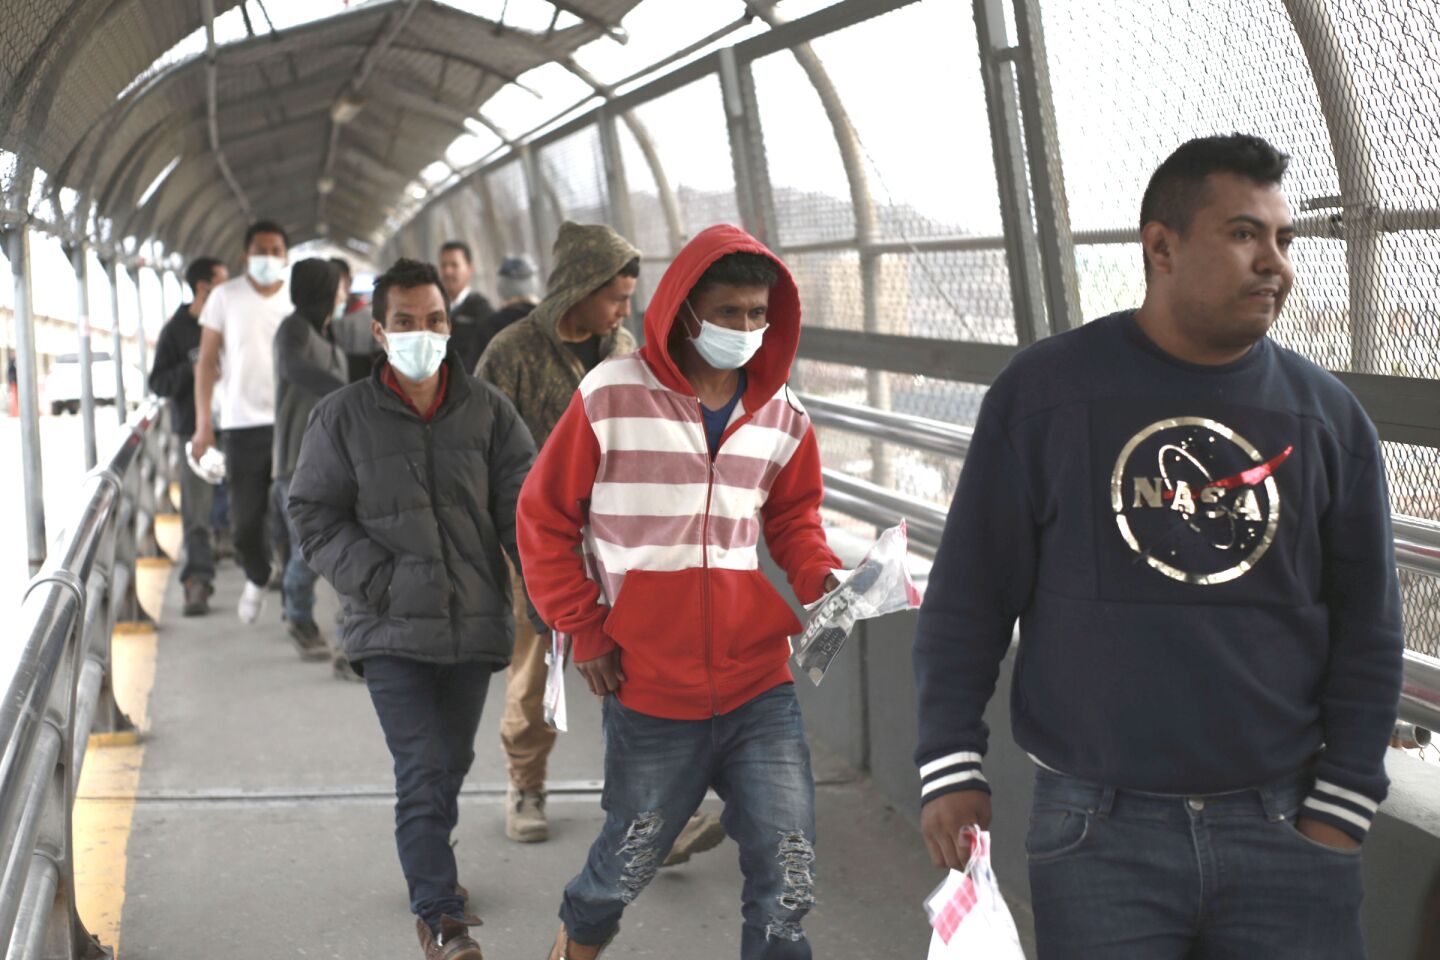 Mexico: Central American migrants seeking asylum, some wearing protective face masks, return to Mexico via the international bridge at the U.S-Mexico border.